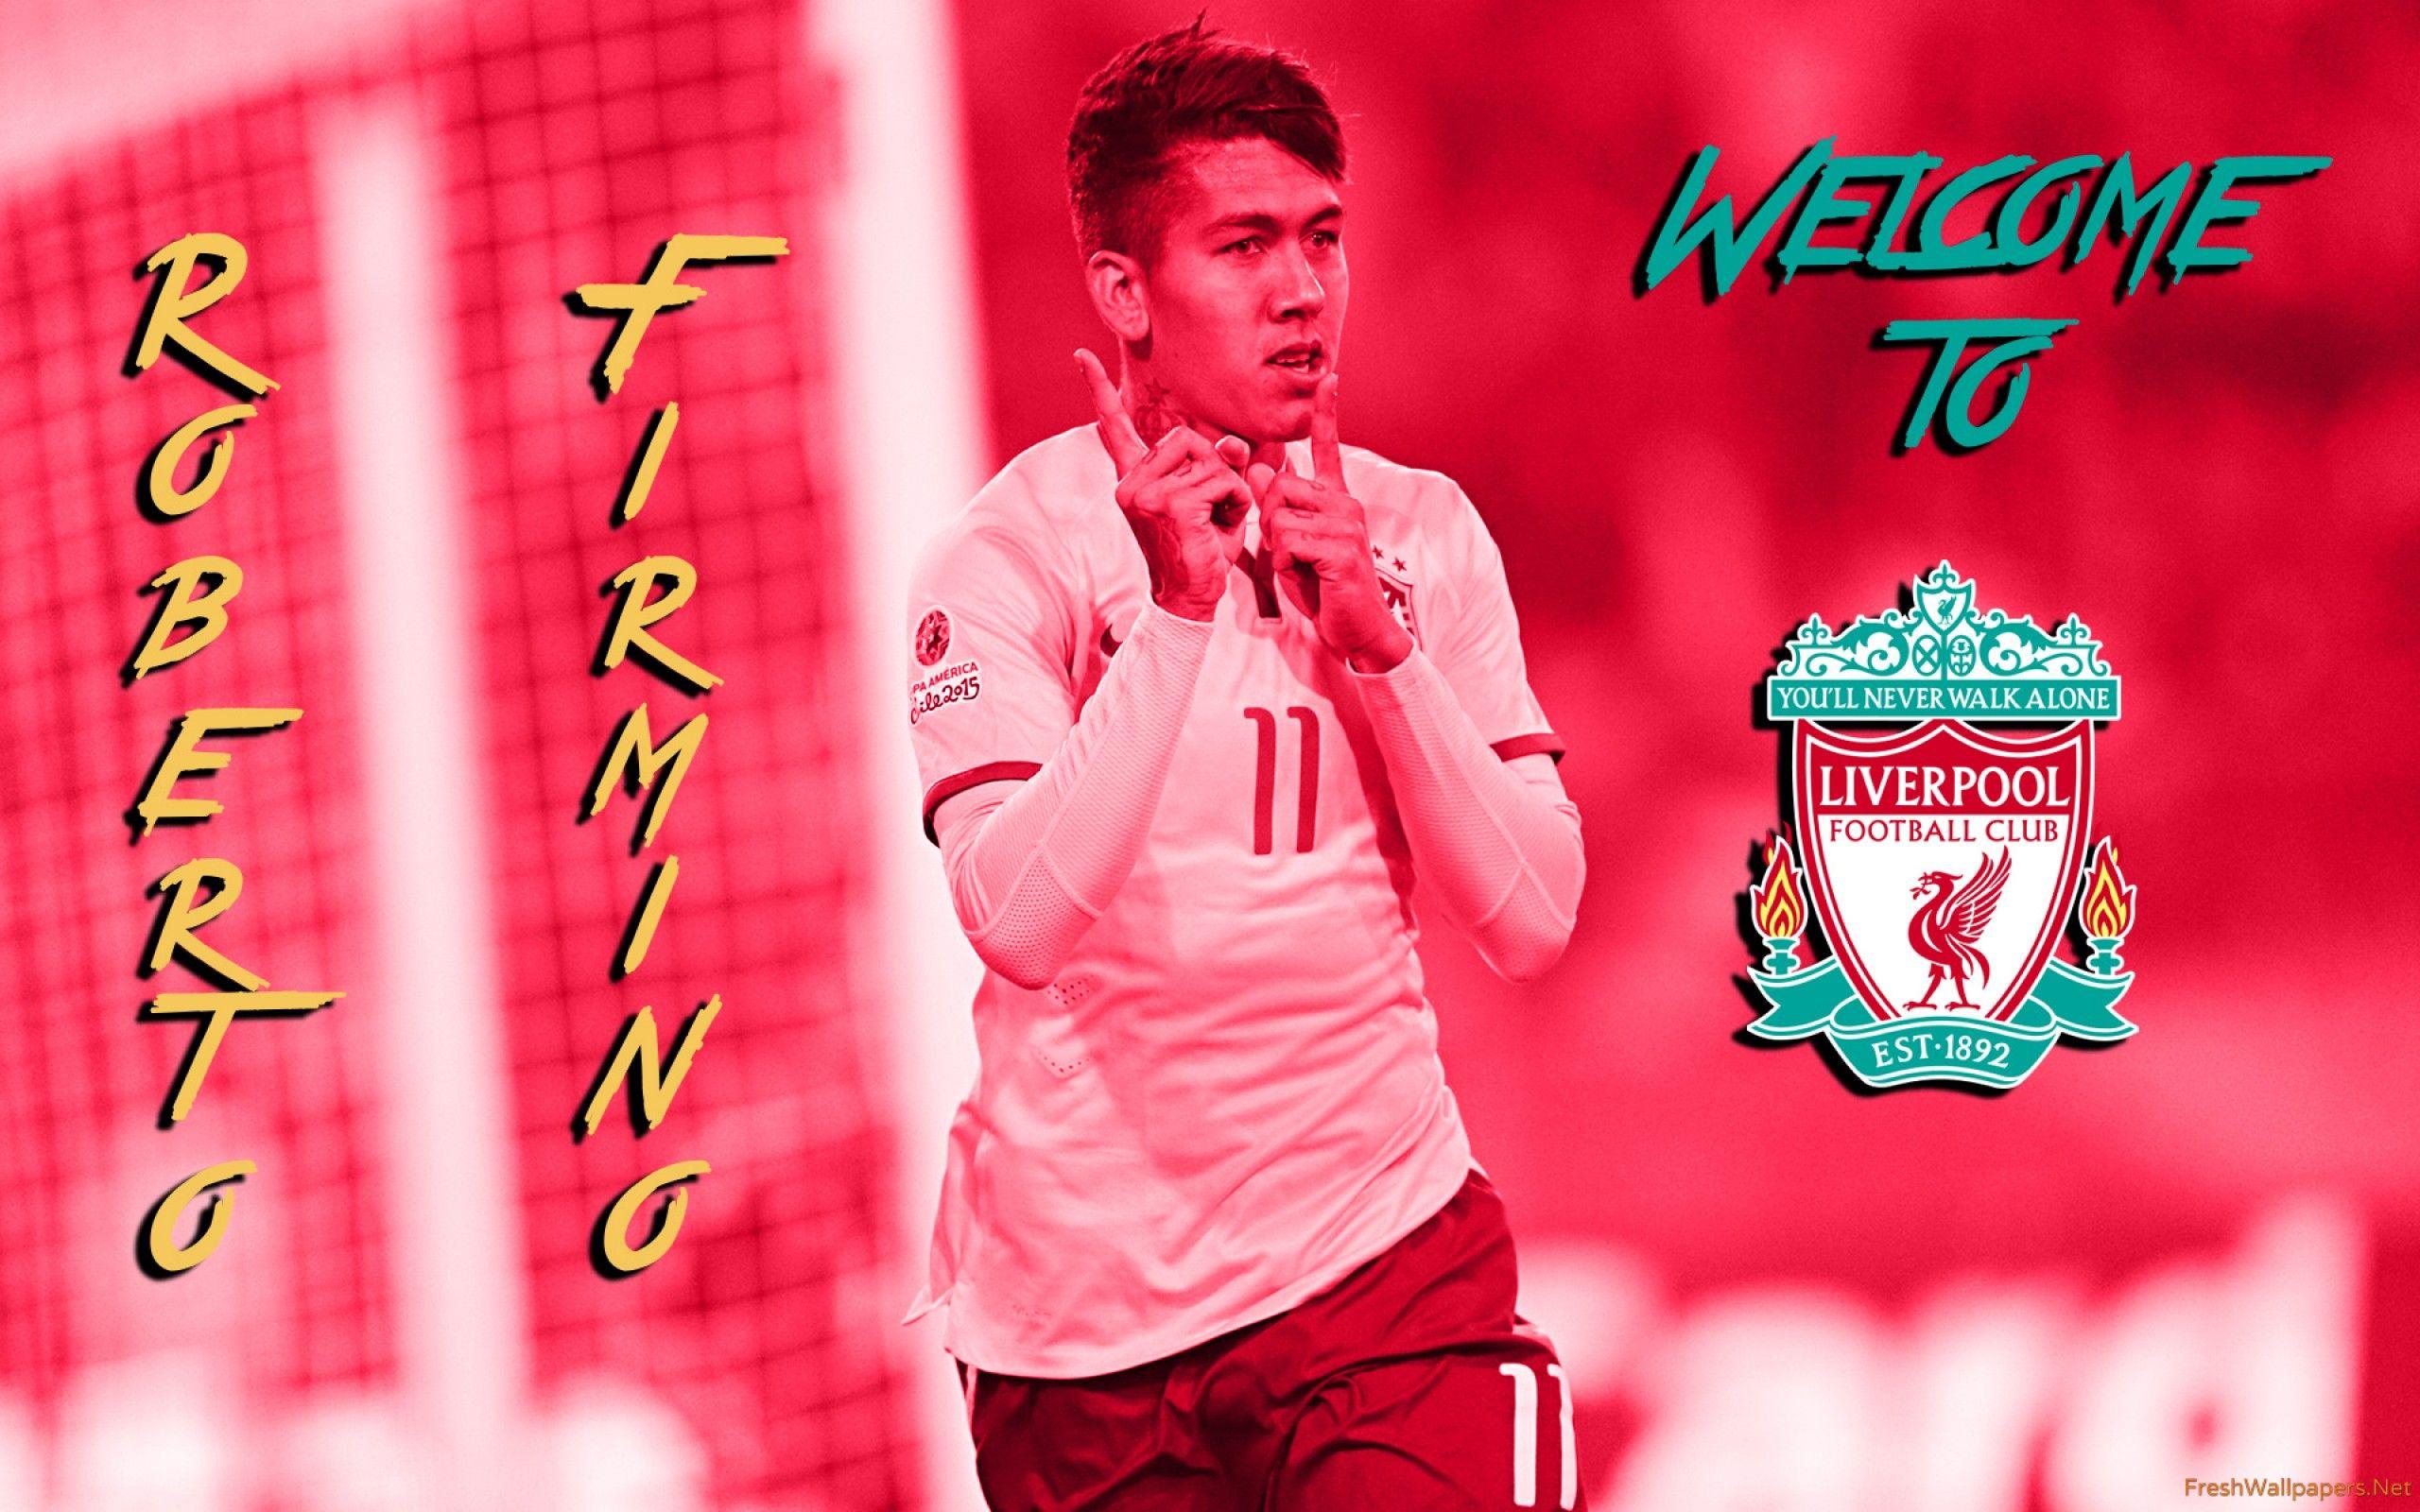 Roberto Firmino 2015 Welcome To Liverpool FC wallpaper